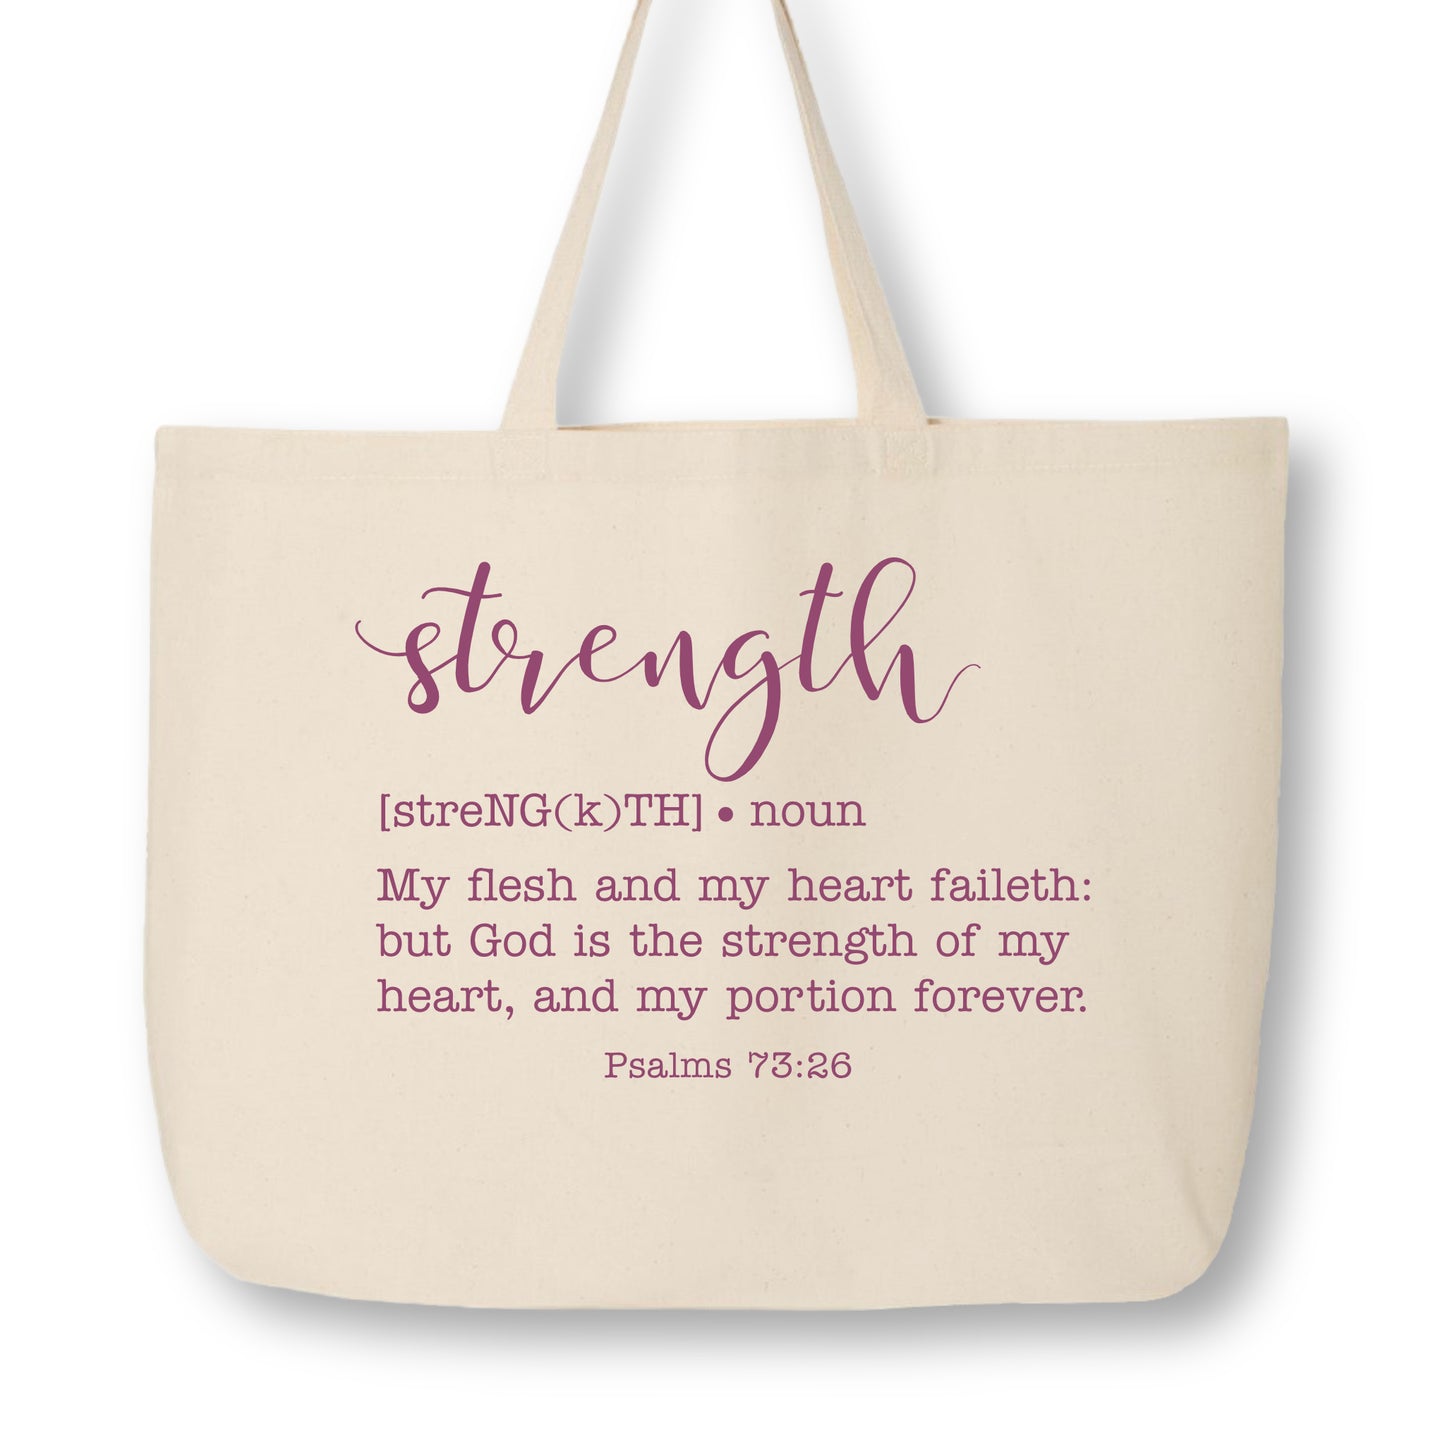 Christian Tote Bag, Bible Verse Psalms, Strength - My flesh and my heart faileth:  but God is the strength of my heart, and my portion forever, Psalms 73:26